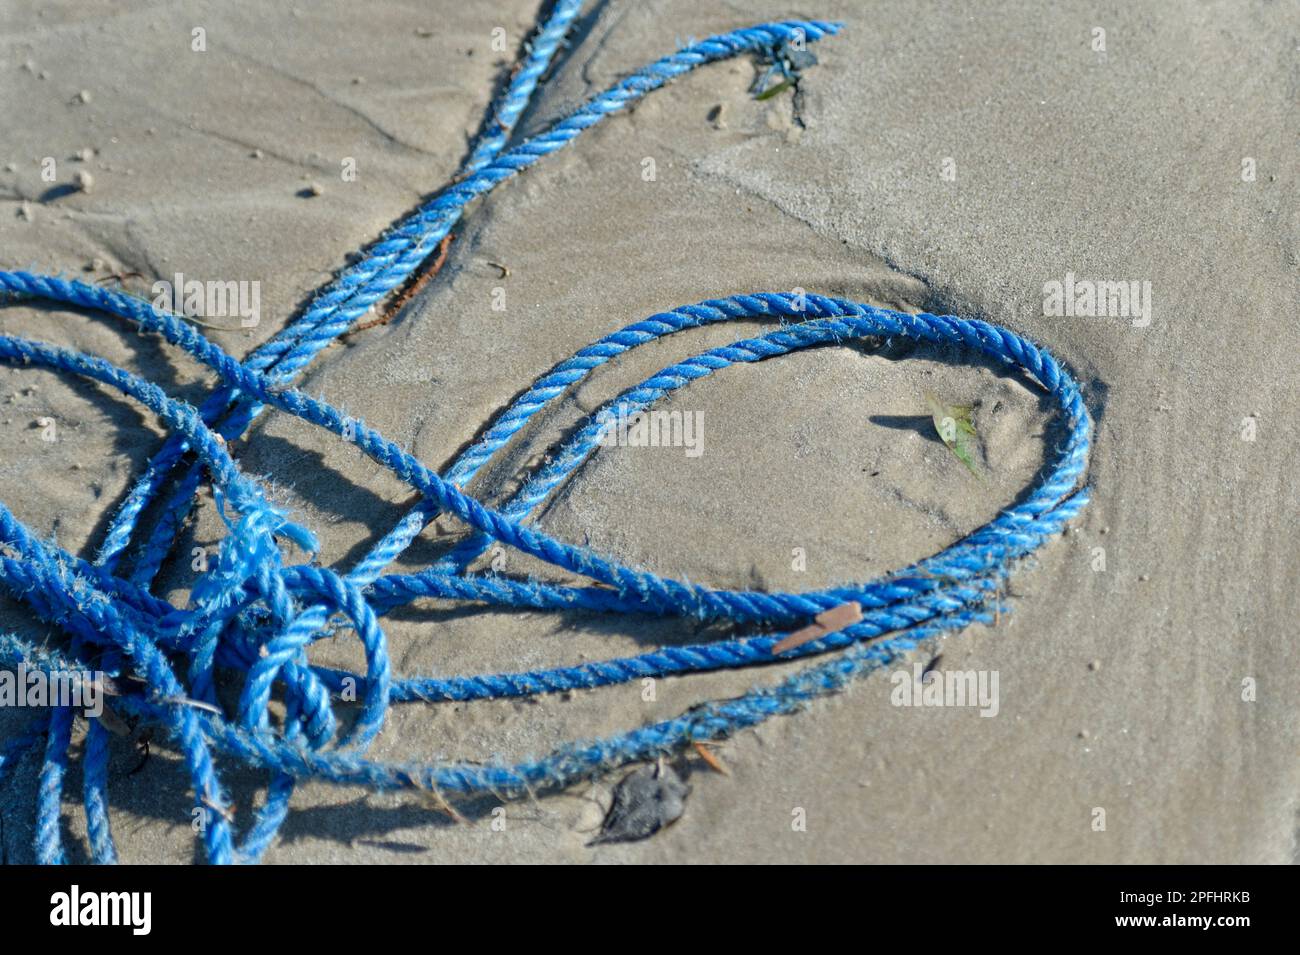 Plastic pollution. Discarded nylon rope on the beach Stock Photo